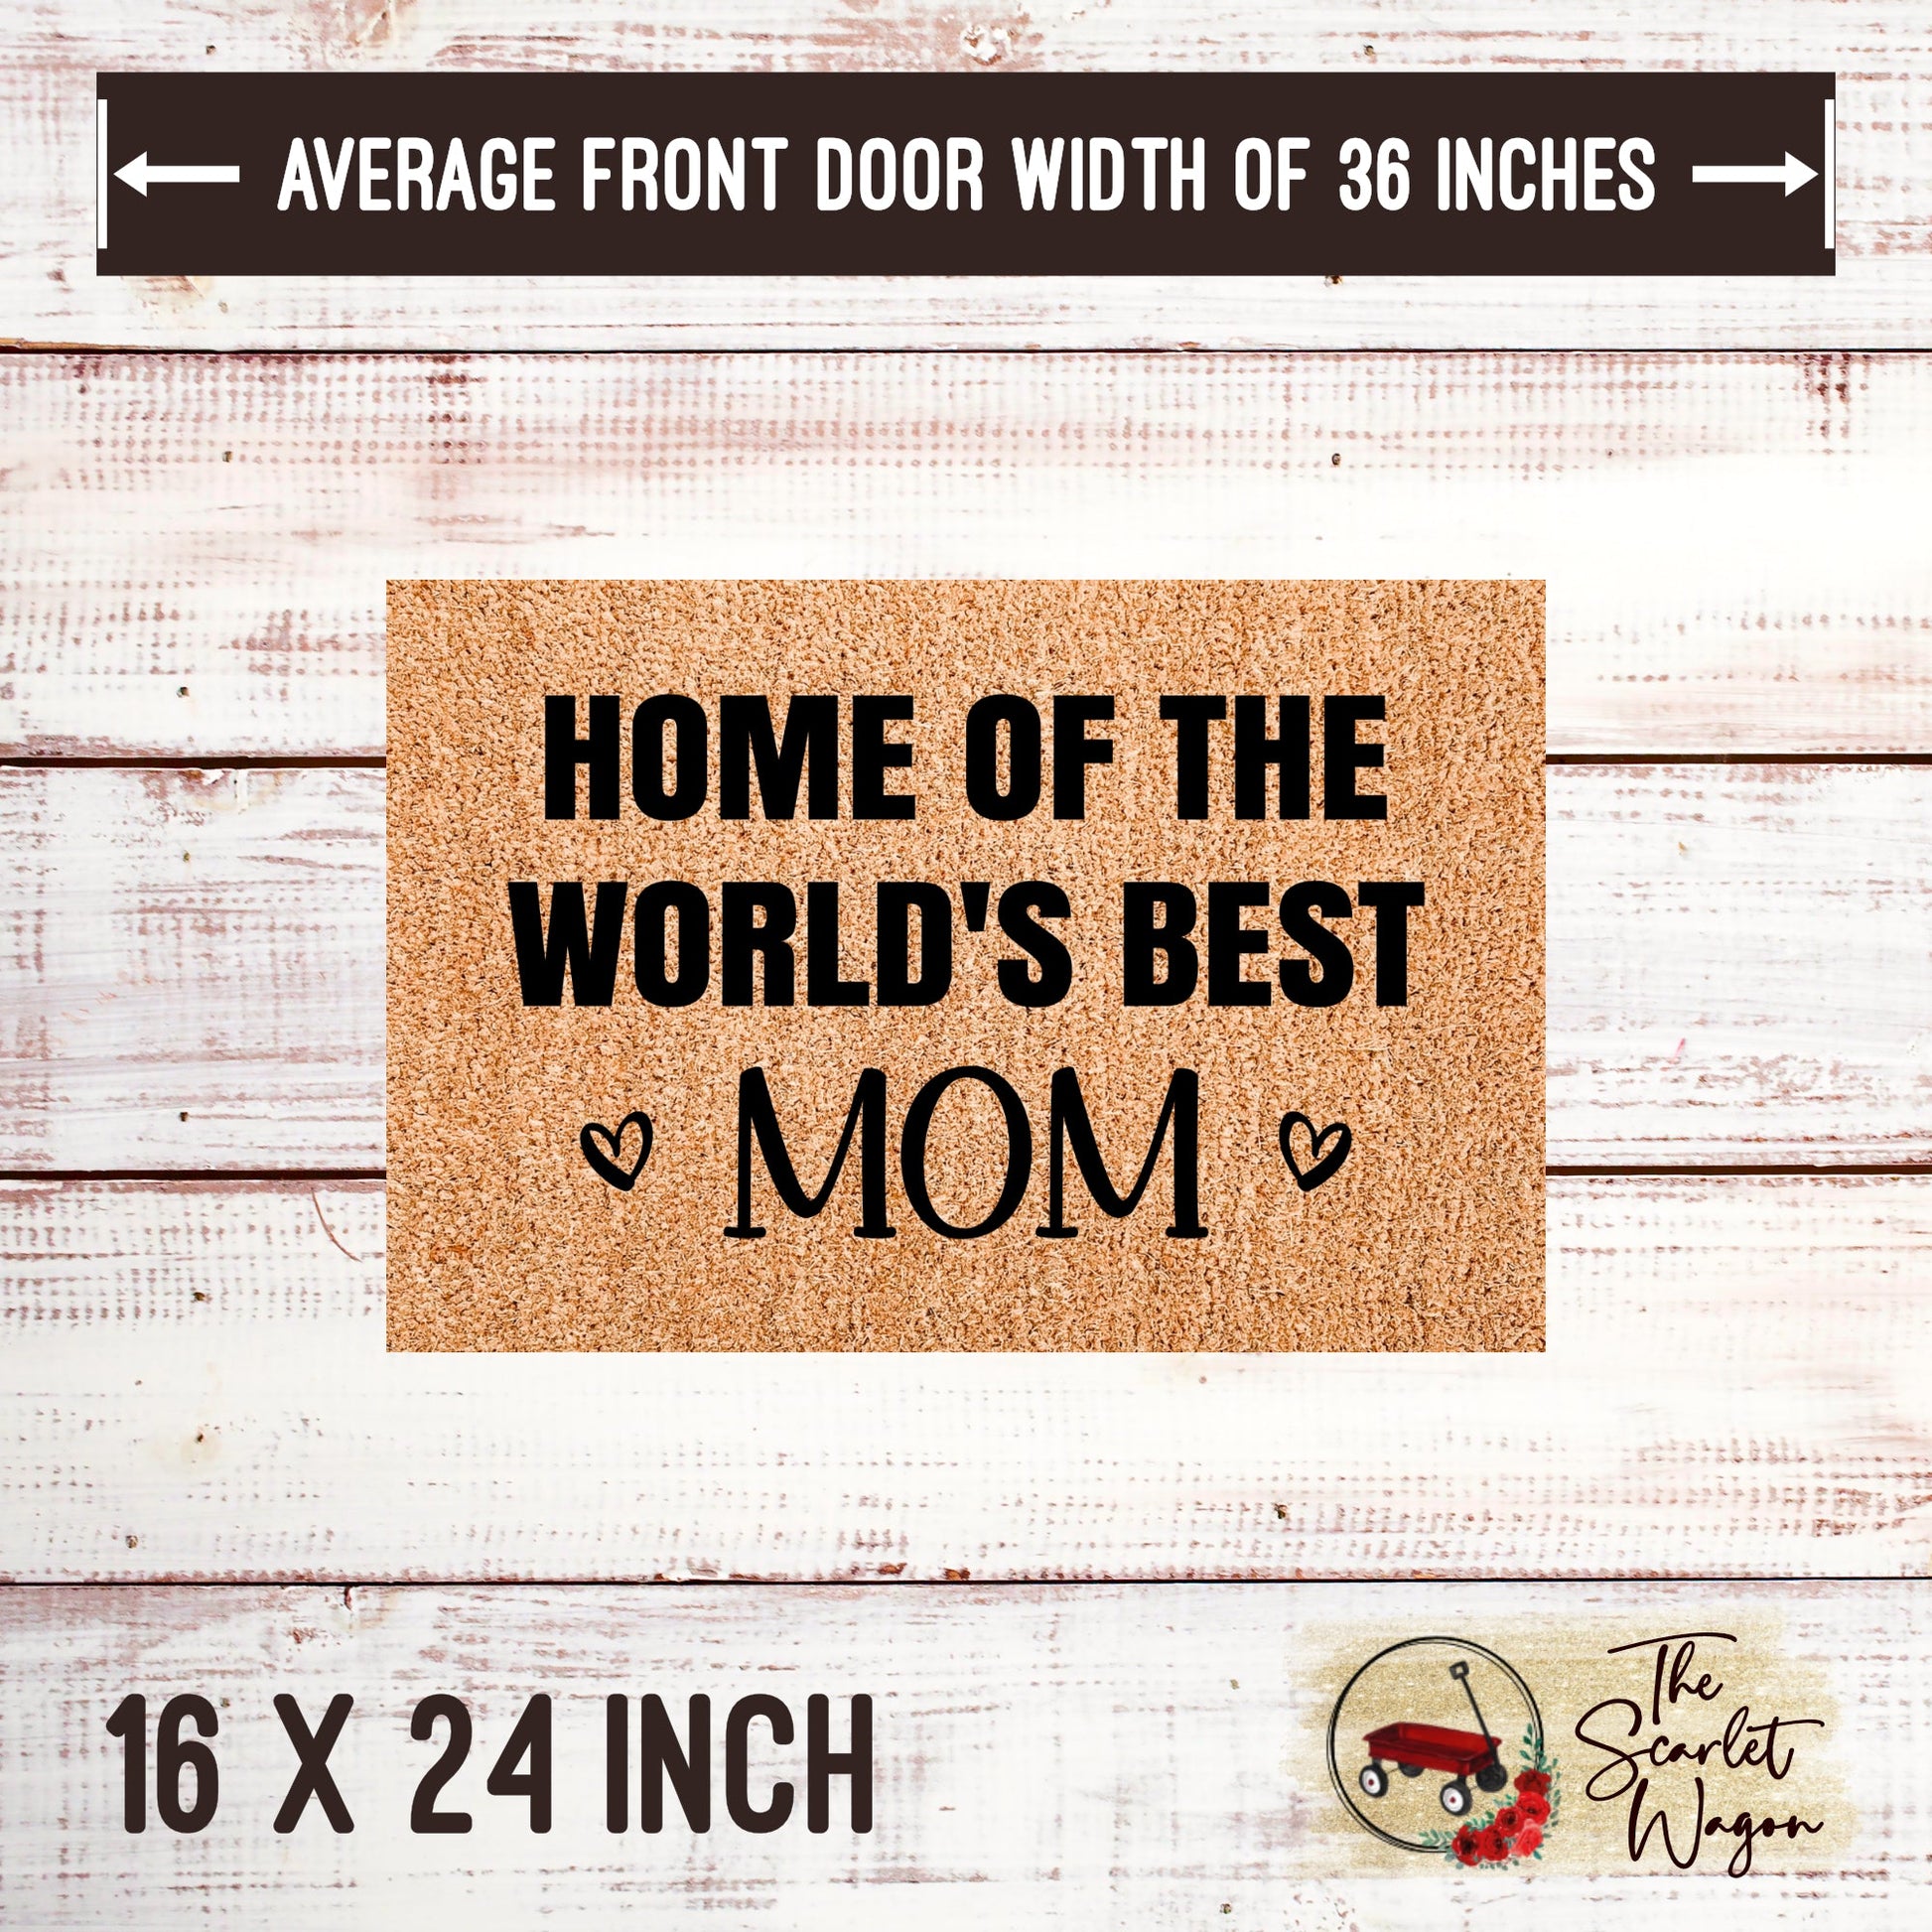 Home of the World's Best Mom Door Mats teelaunch 16x24 Inches (Free Shipping) 